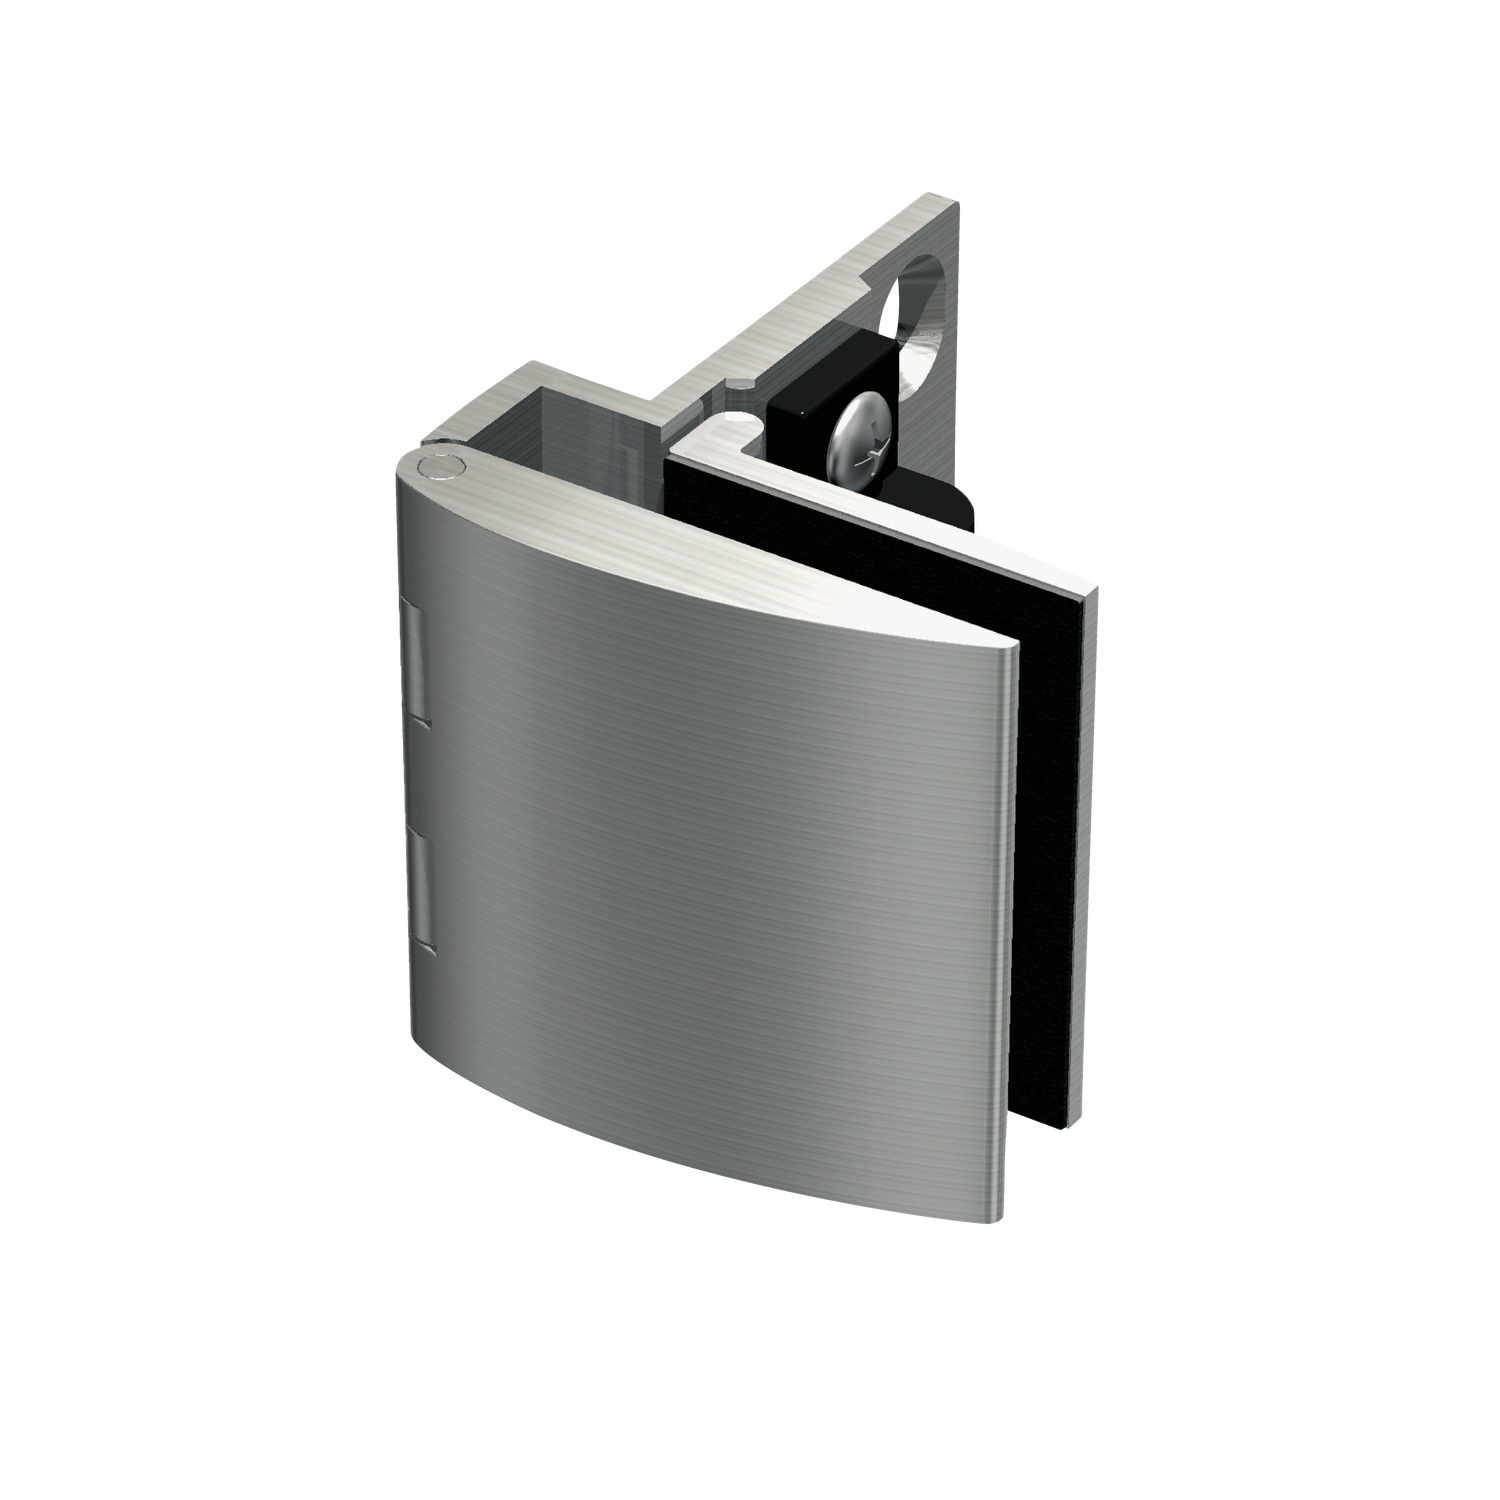 T2240.AC0030 Spring Hinges - High Tension - SS. With catch - Brass - Gold finish - Glass thickness 5 to 8mm. Load capacity 2 hinges 15kg